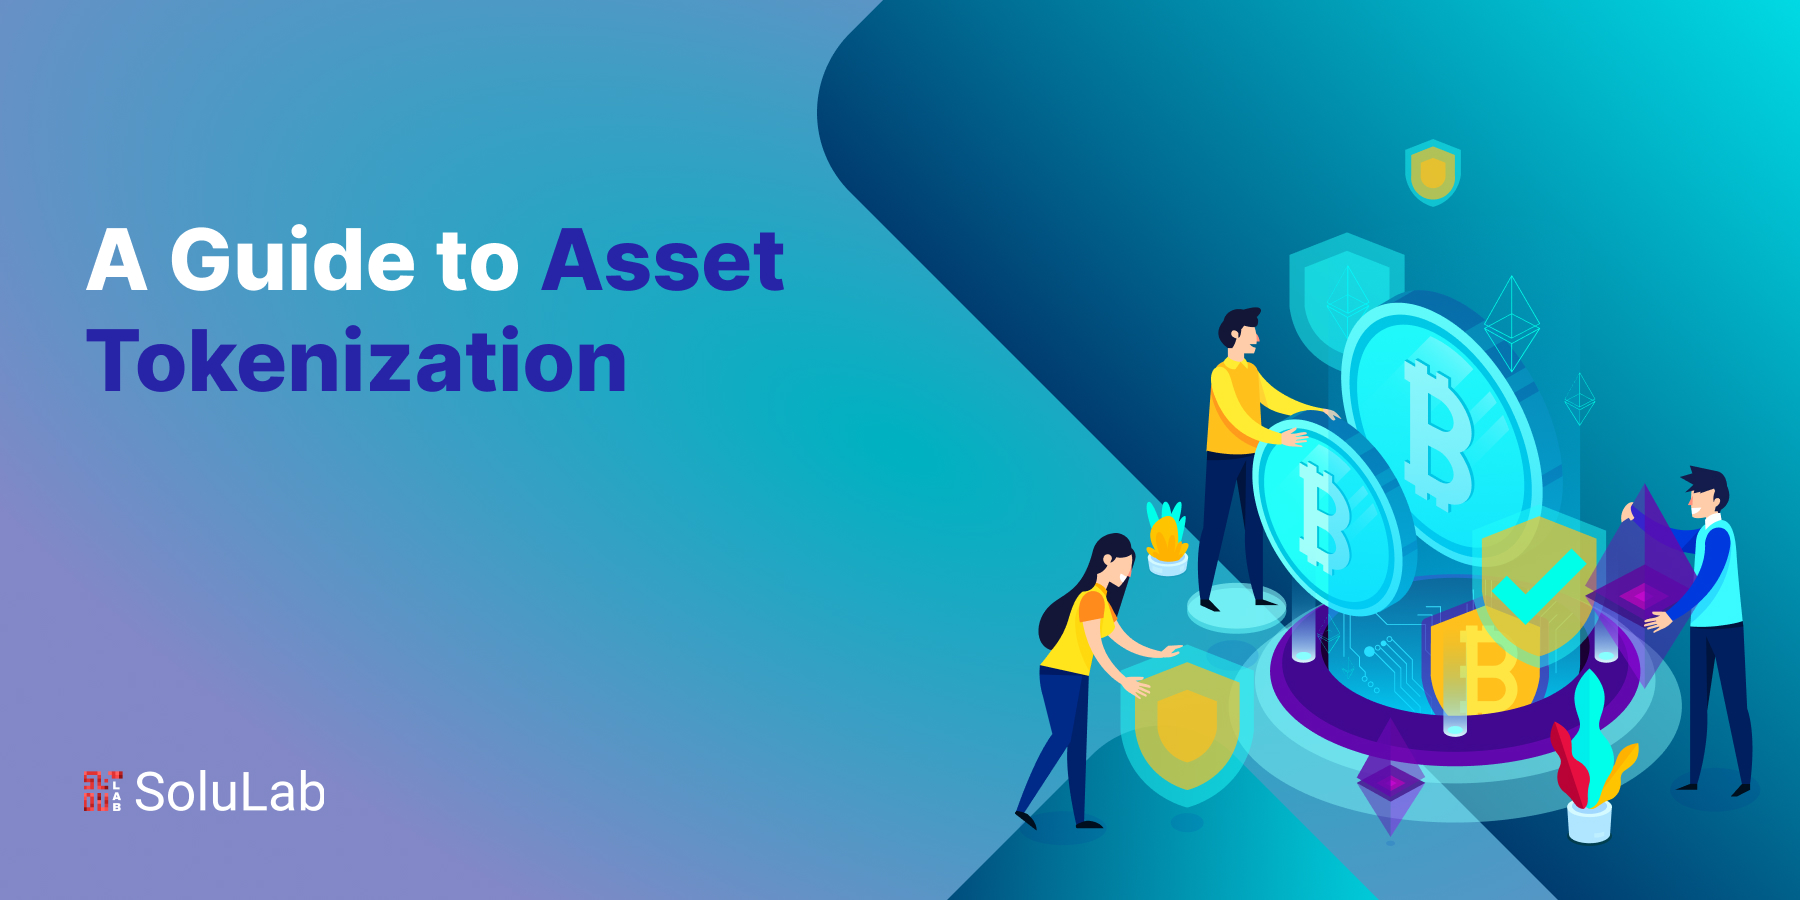 A Guide to Asset Tokenization